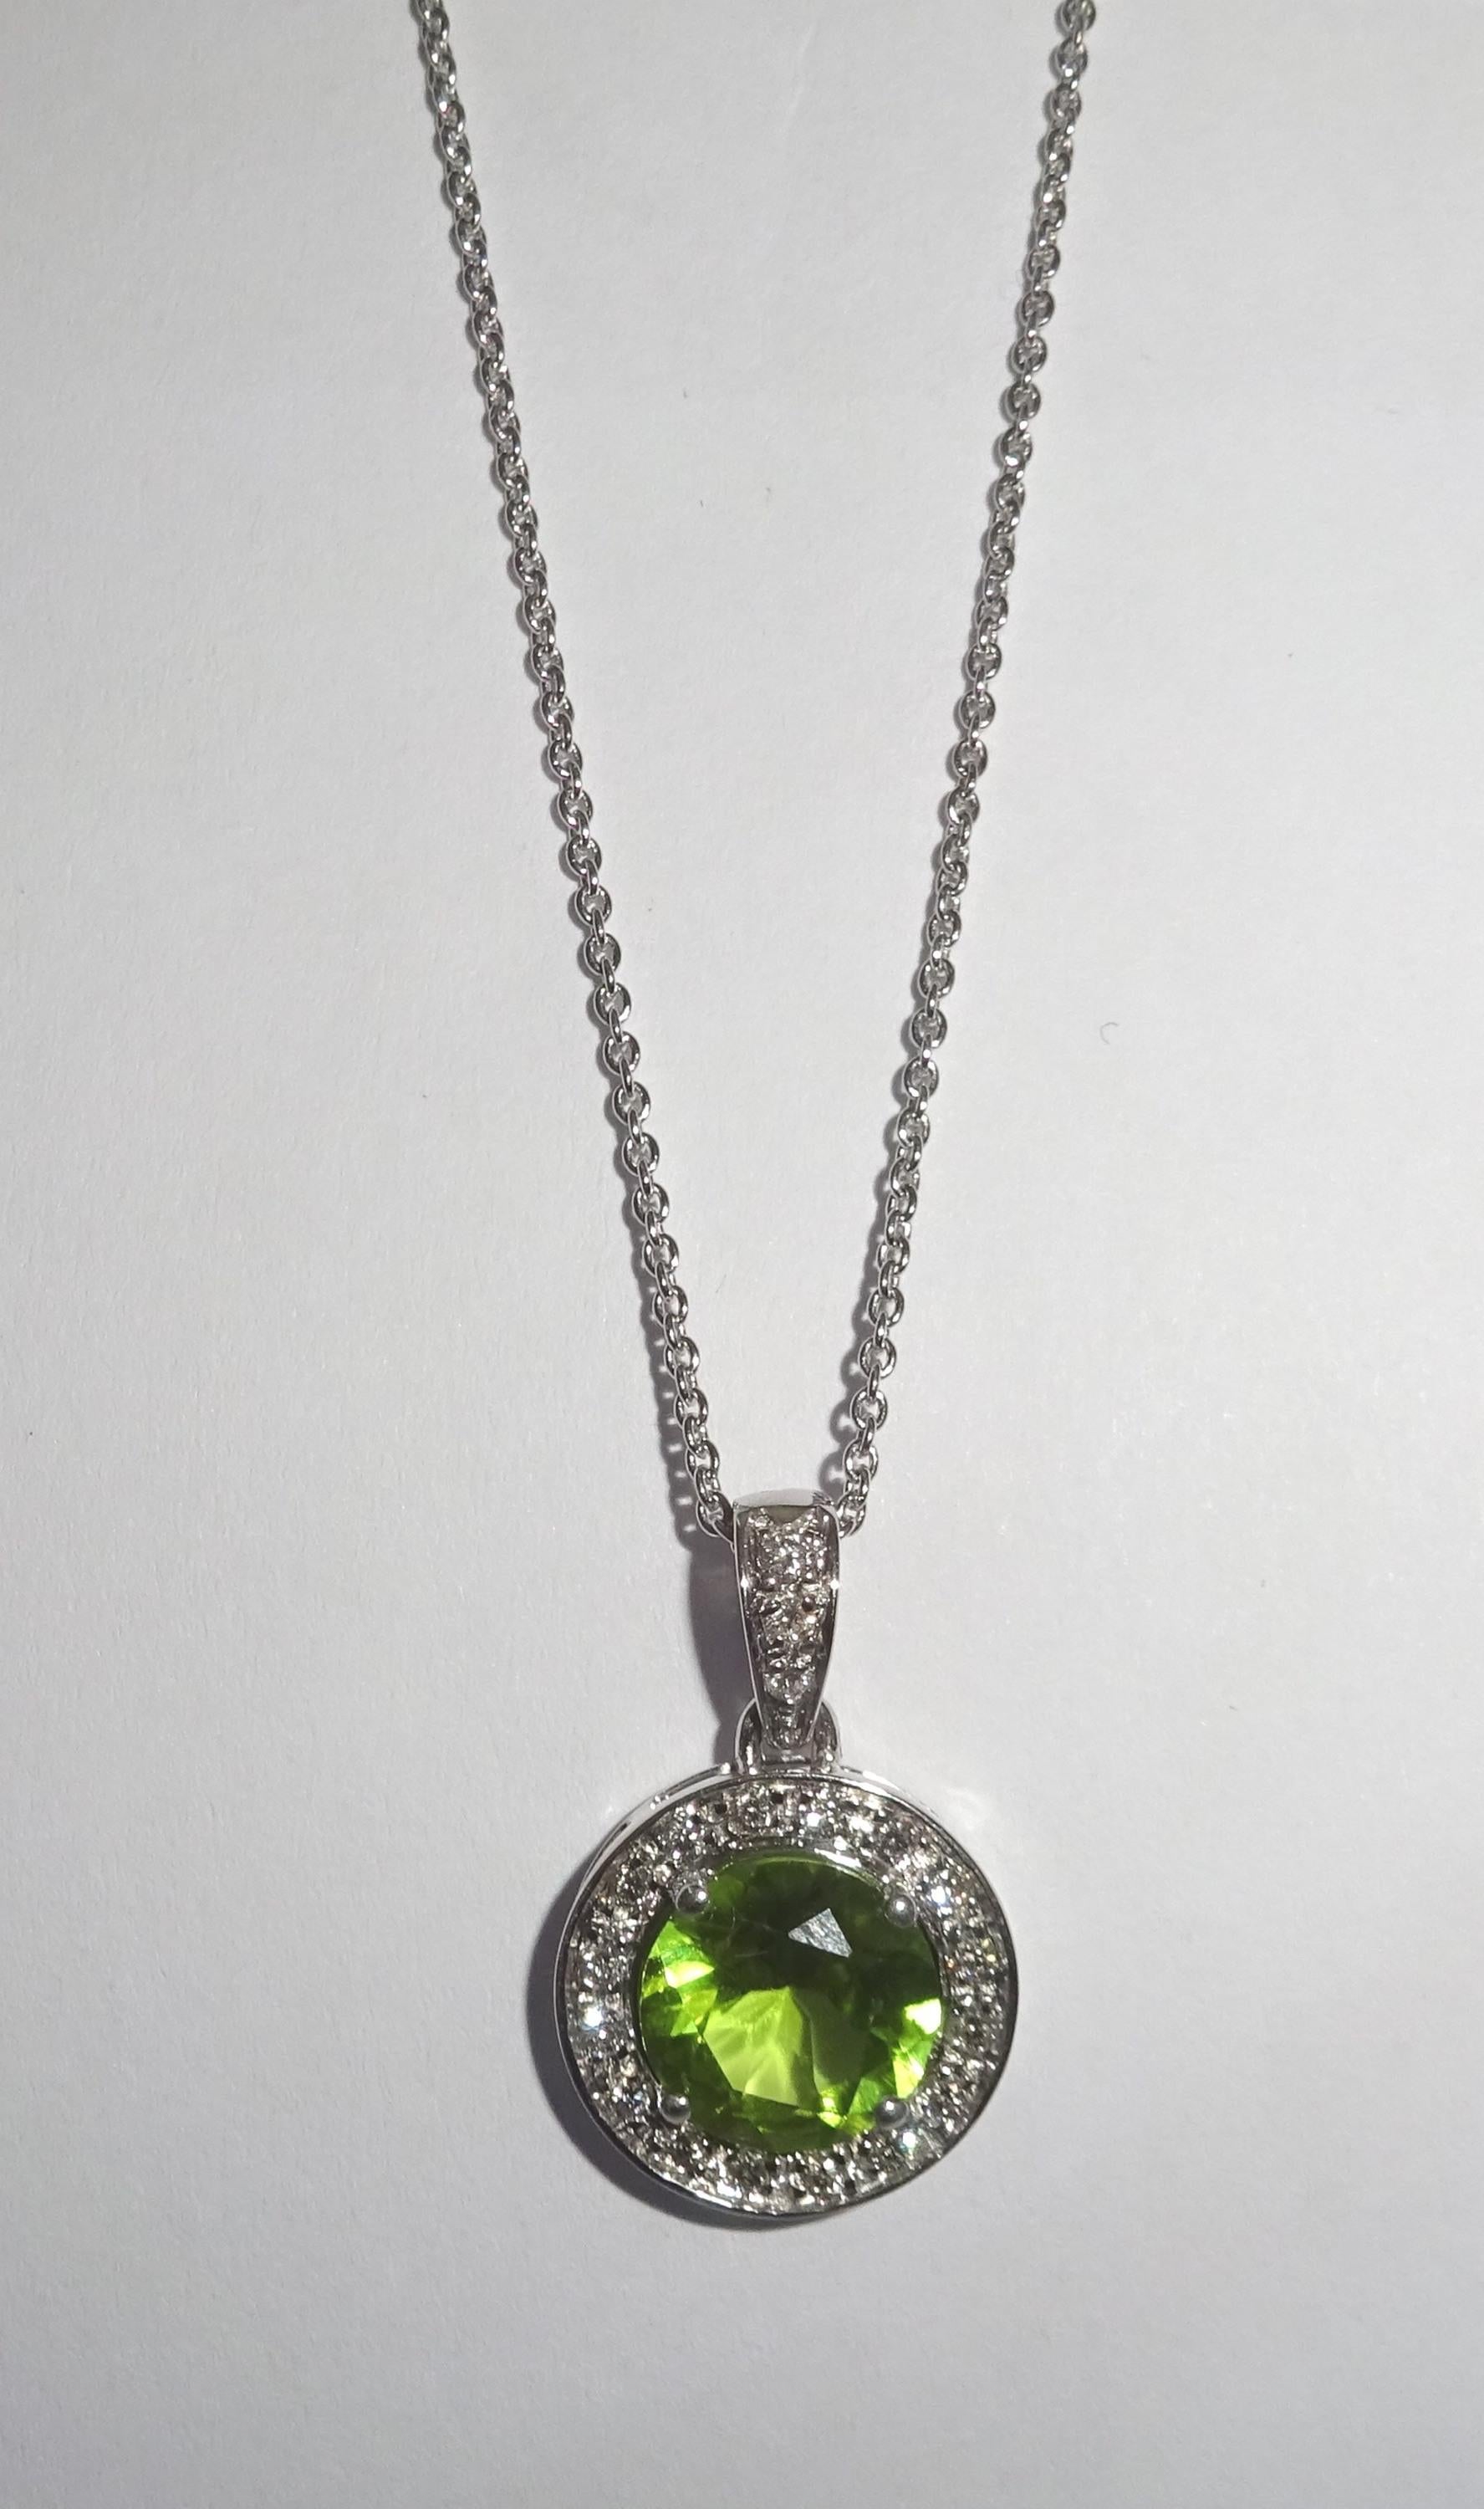 18 Karat White Gold  Diamonds and Peridot Pendant Neclas

19 Diamonds 0.28 ct.
1 Peridot 1.96  ct




Founded in 1974, Gianni Lazzaro is a family-owned jewelery company based out of Düsseldorf, Germany.
Although rooted in Germany, Gianni Lazzaro's